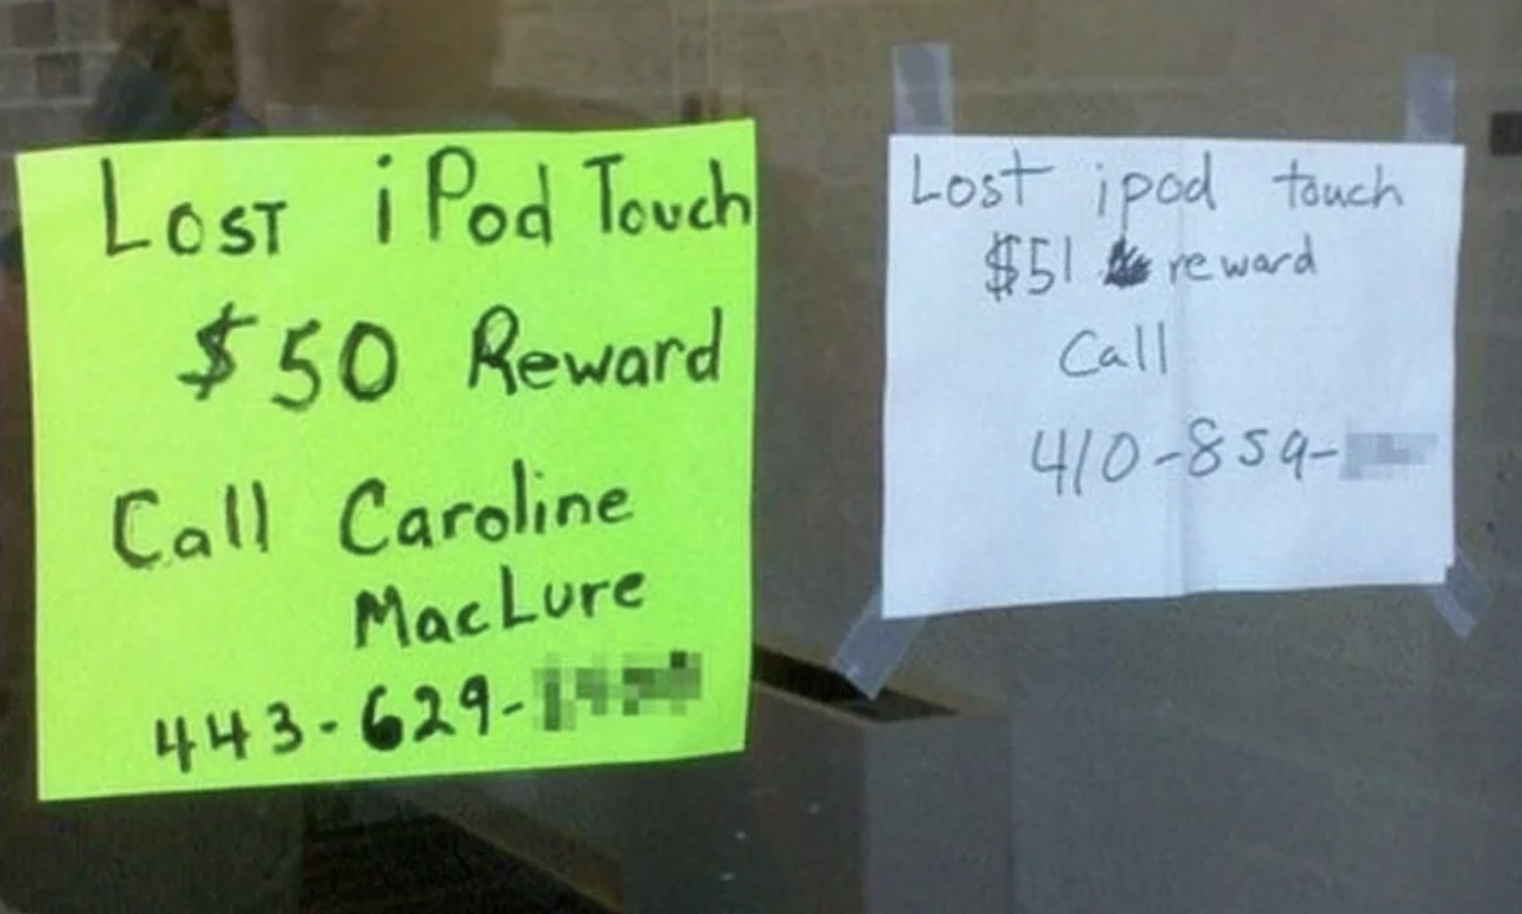 2 reward posters next to each other, one giving $50 for a lost ipod touch and the other giving $51 for a lost ipod touch